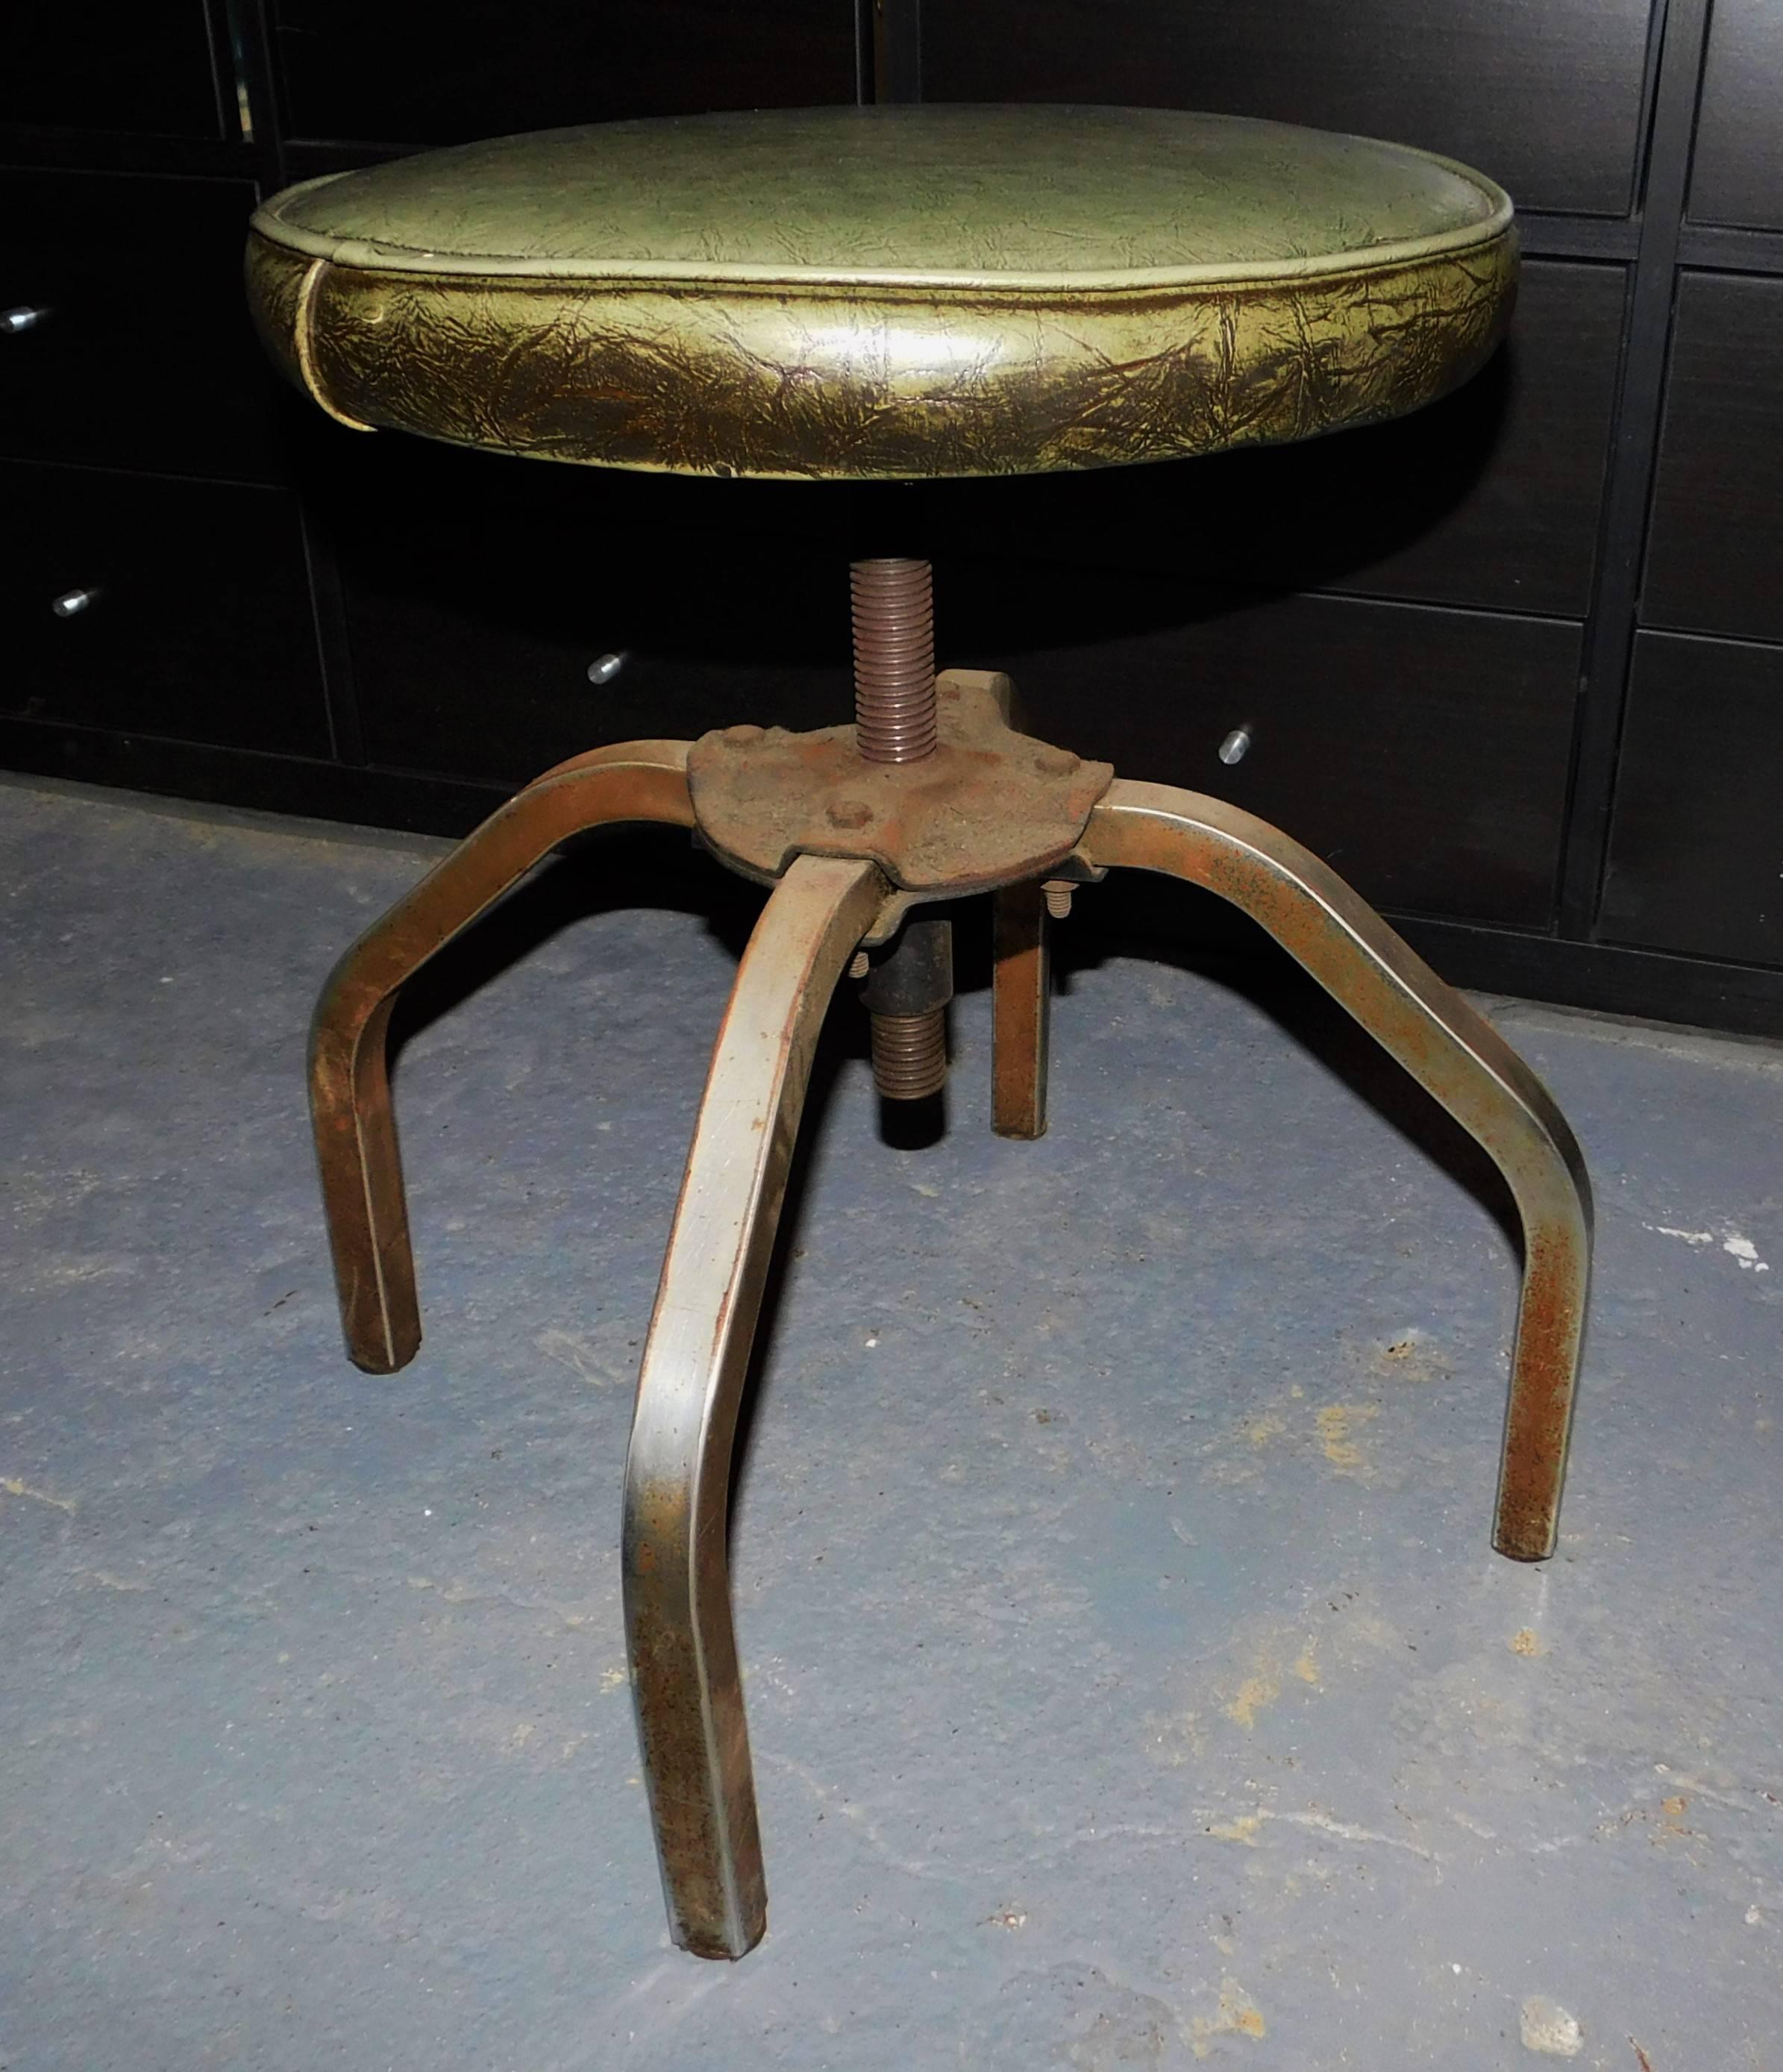 This circa 1940 swivel leather and metal stool could have been used by a dentist or doctor's office. It can be rotated to raise or lower the green leather seat.